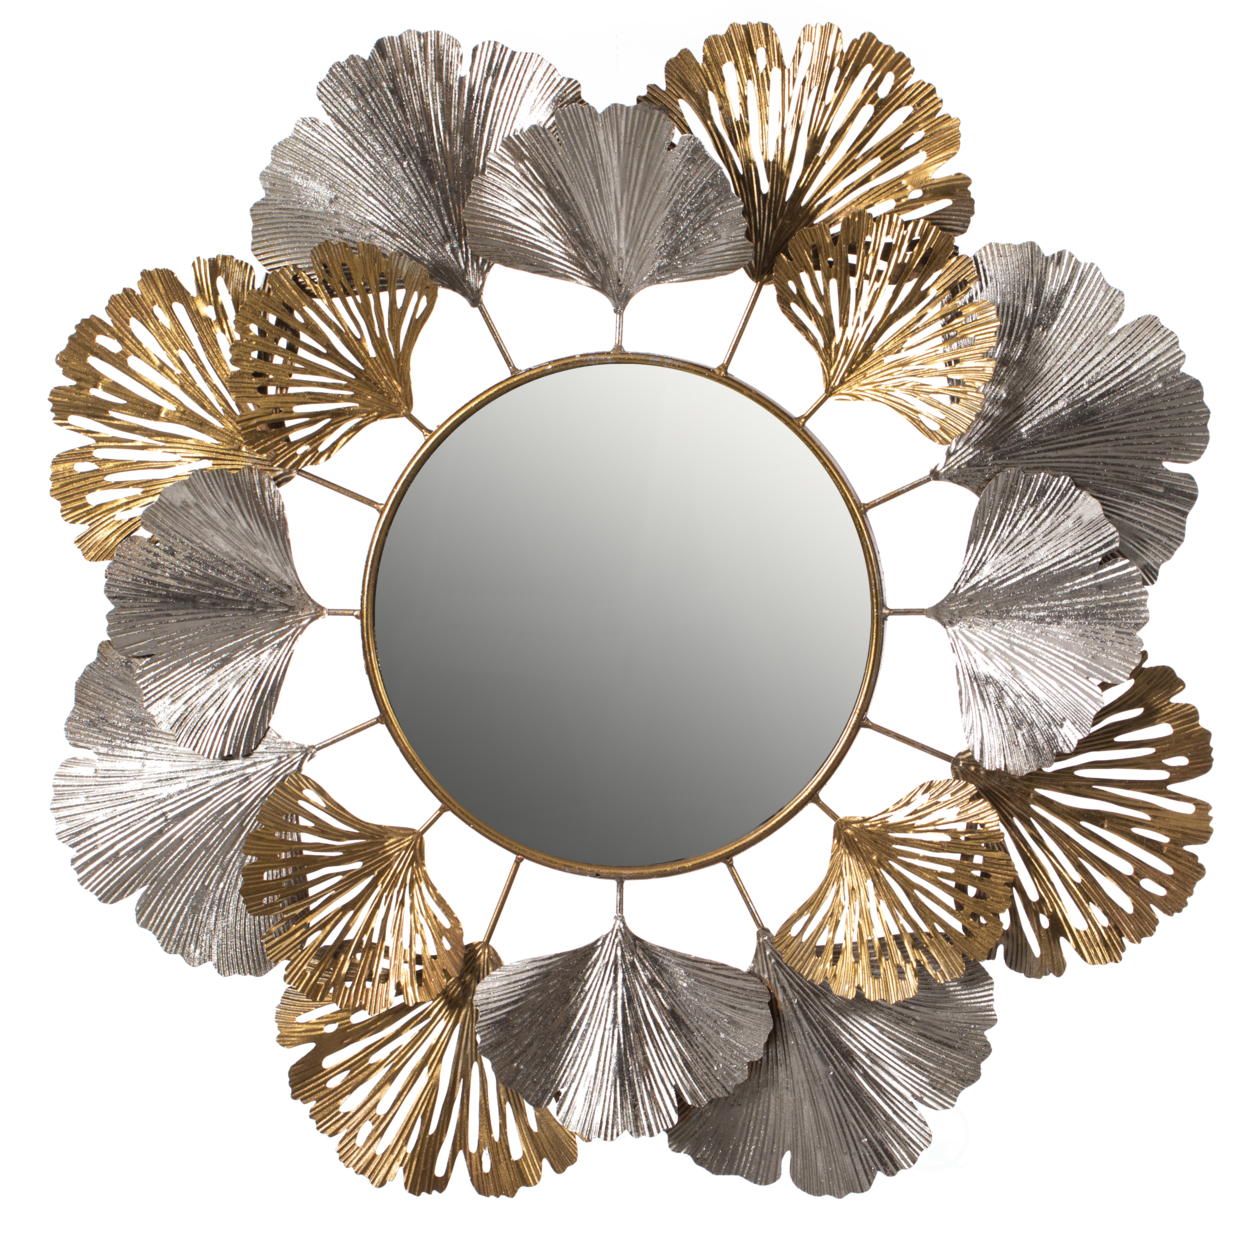 33" Accent Wall Mounted Mirror with Gold and Silver with Decorative Modern Ginkgo Leaf Frame